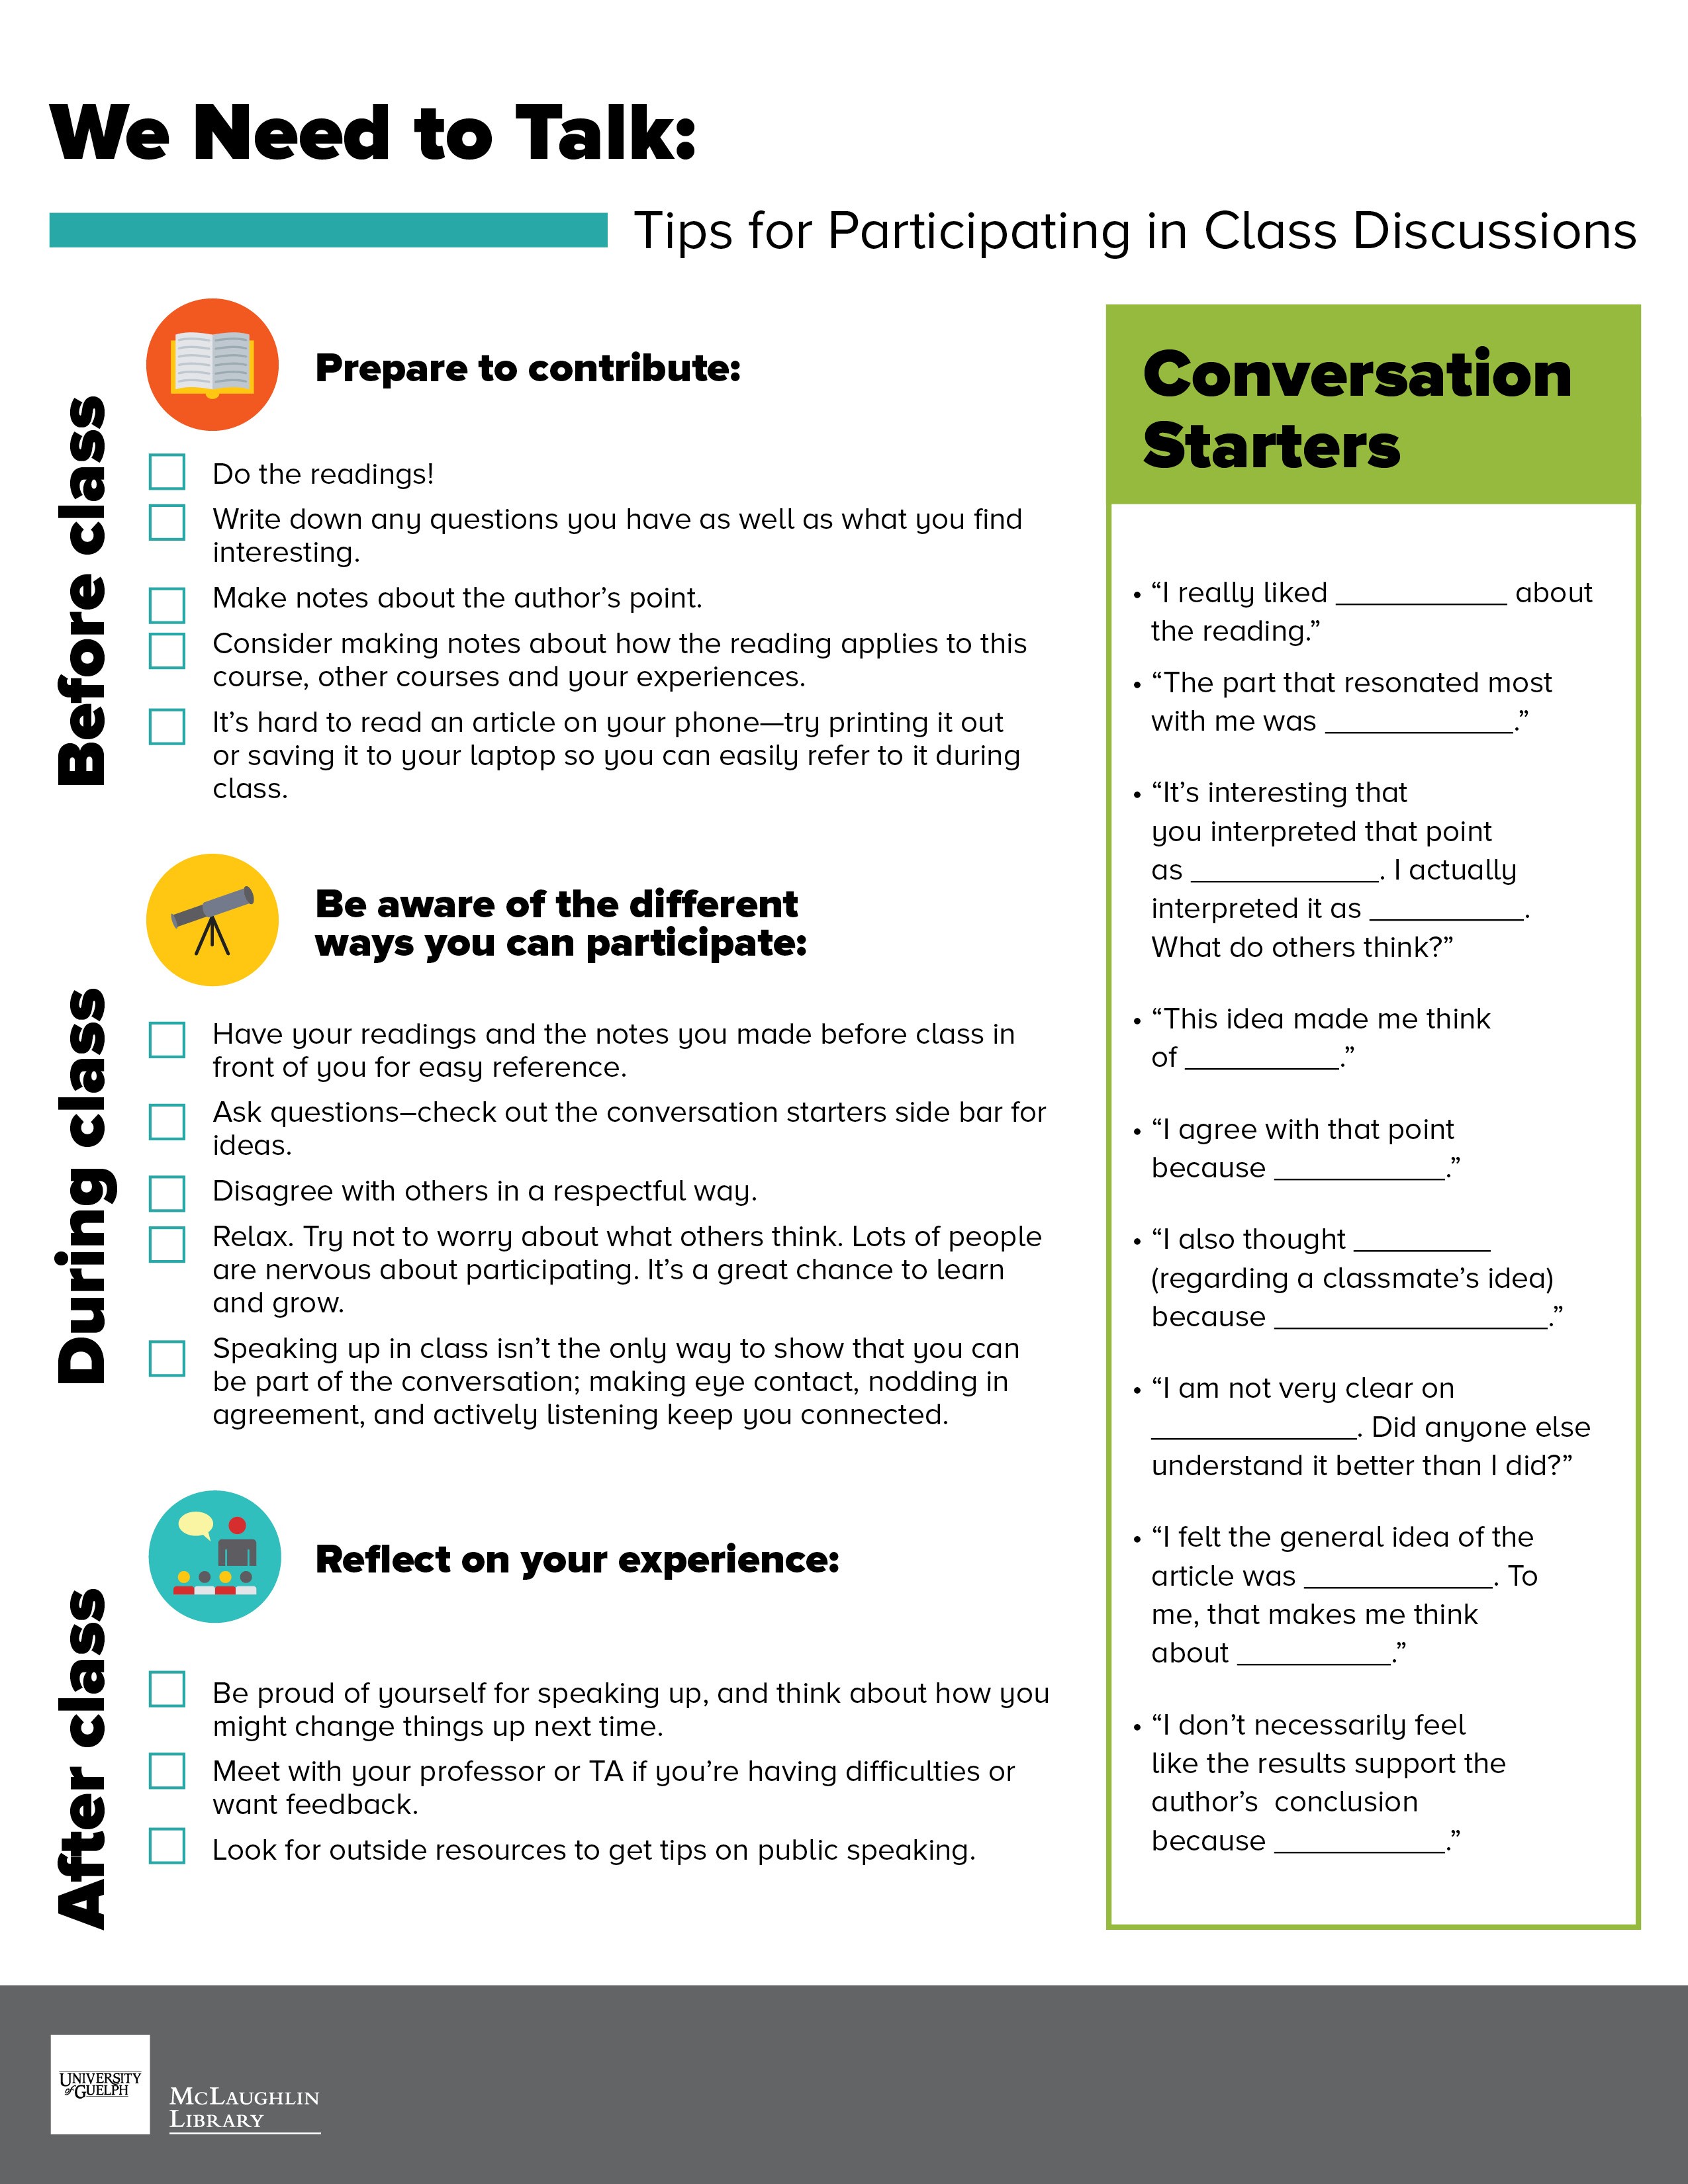 We Need to Talk: Tips for Participating in Class Discussions. Transcript available below. 